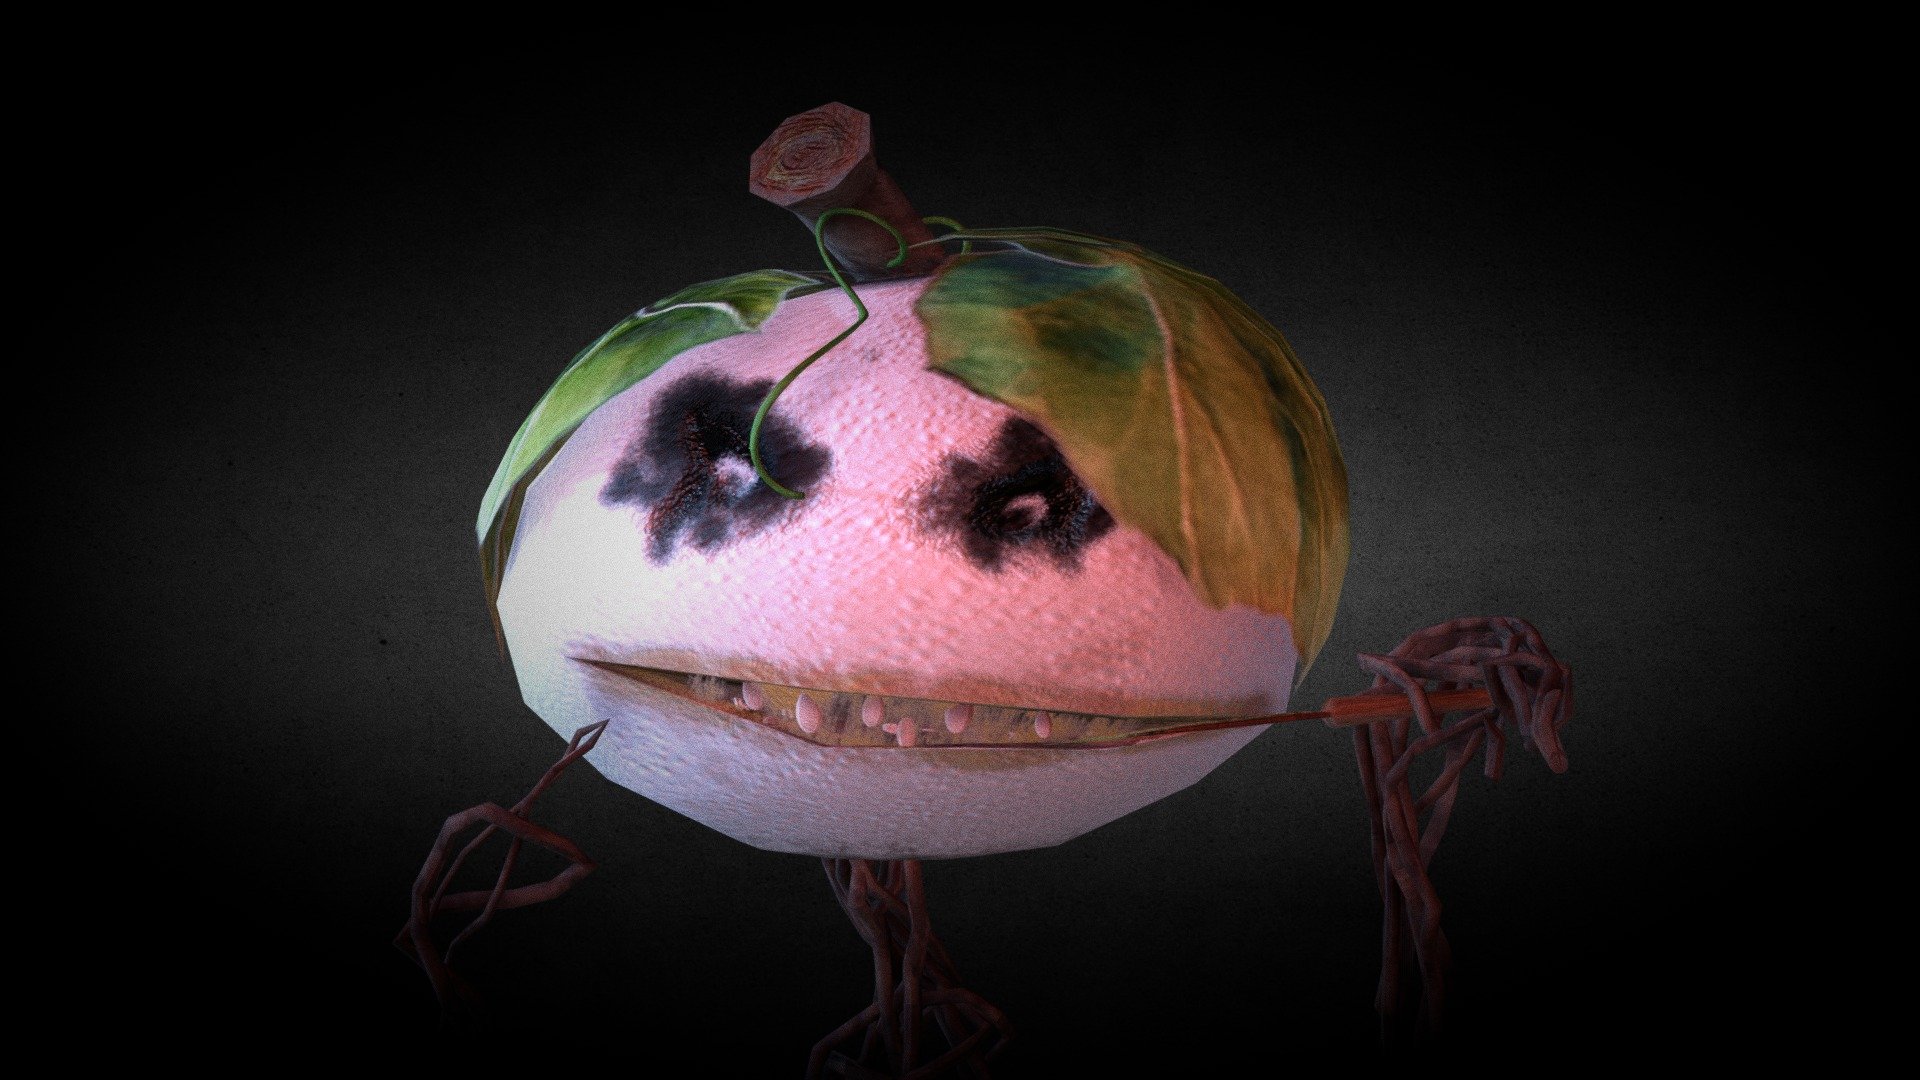 Happy Halloween 2019 everyone ! - Let me put a smile on this face ! - Pumker - 3D model by Caturegli David (@CopycatDesign) 3d model